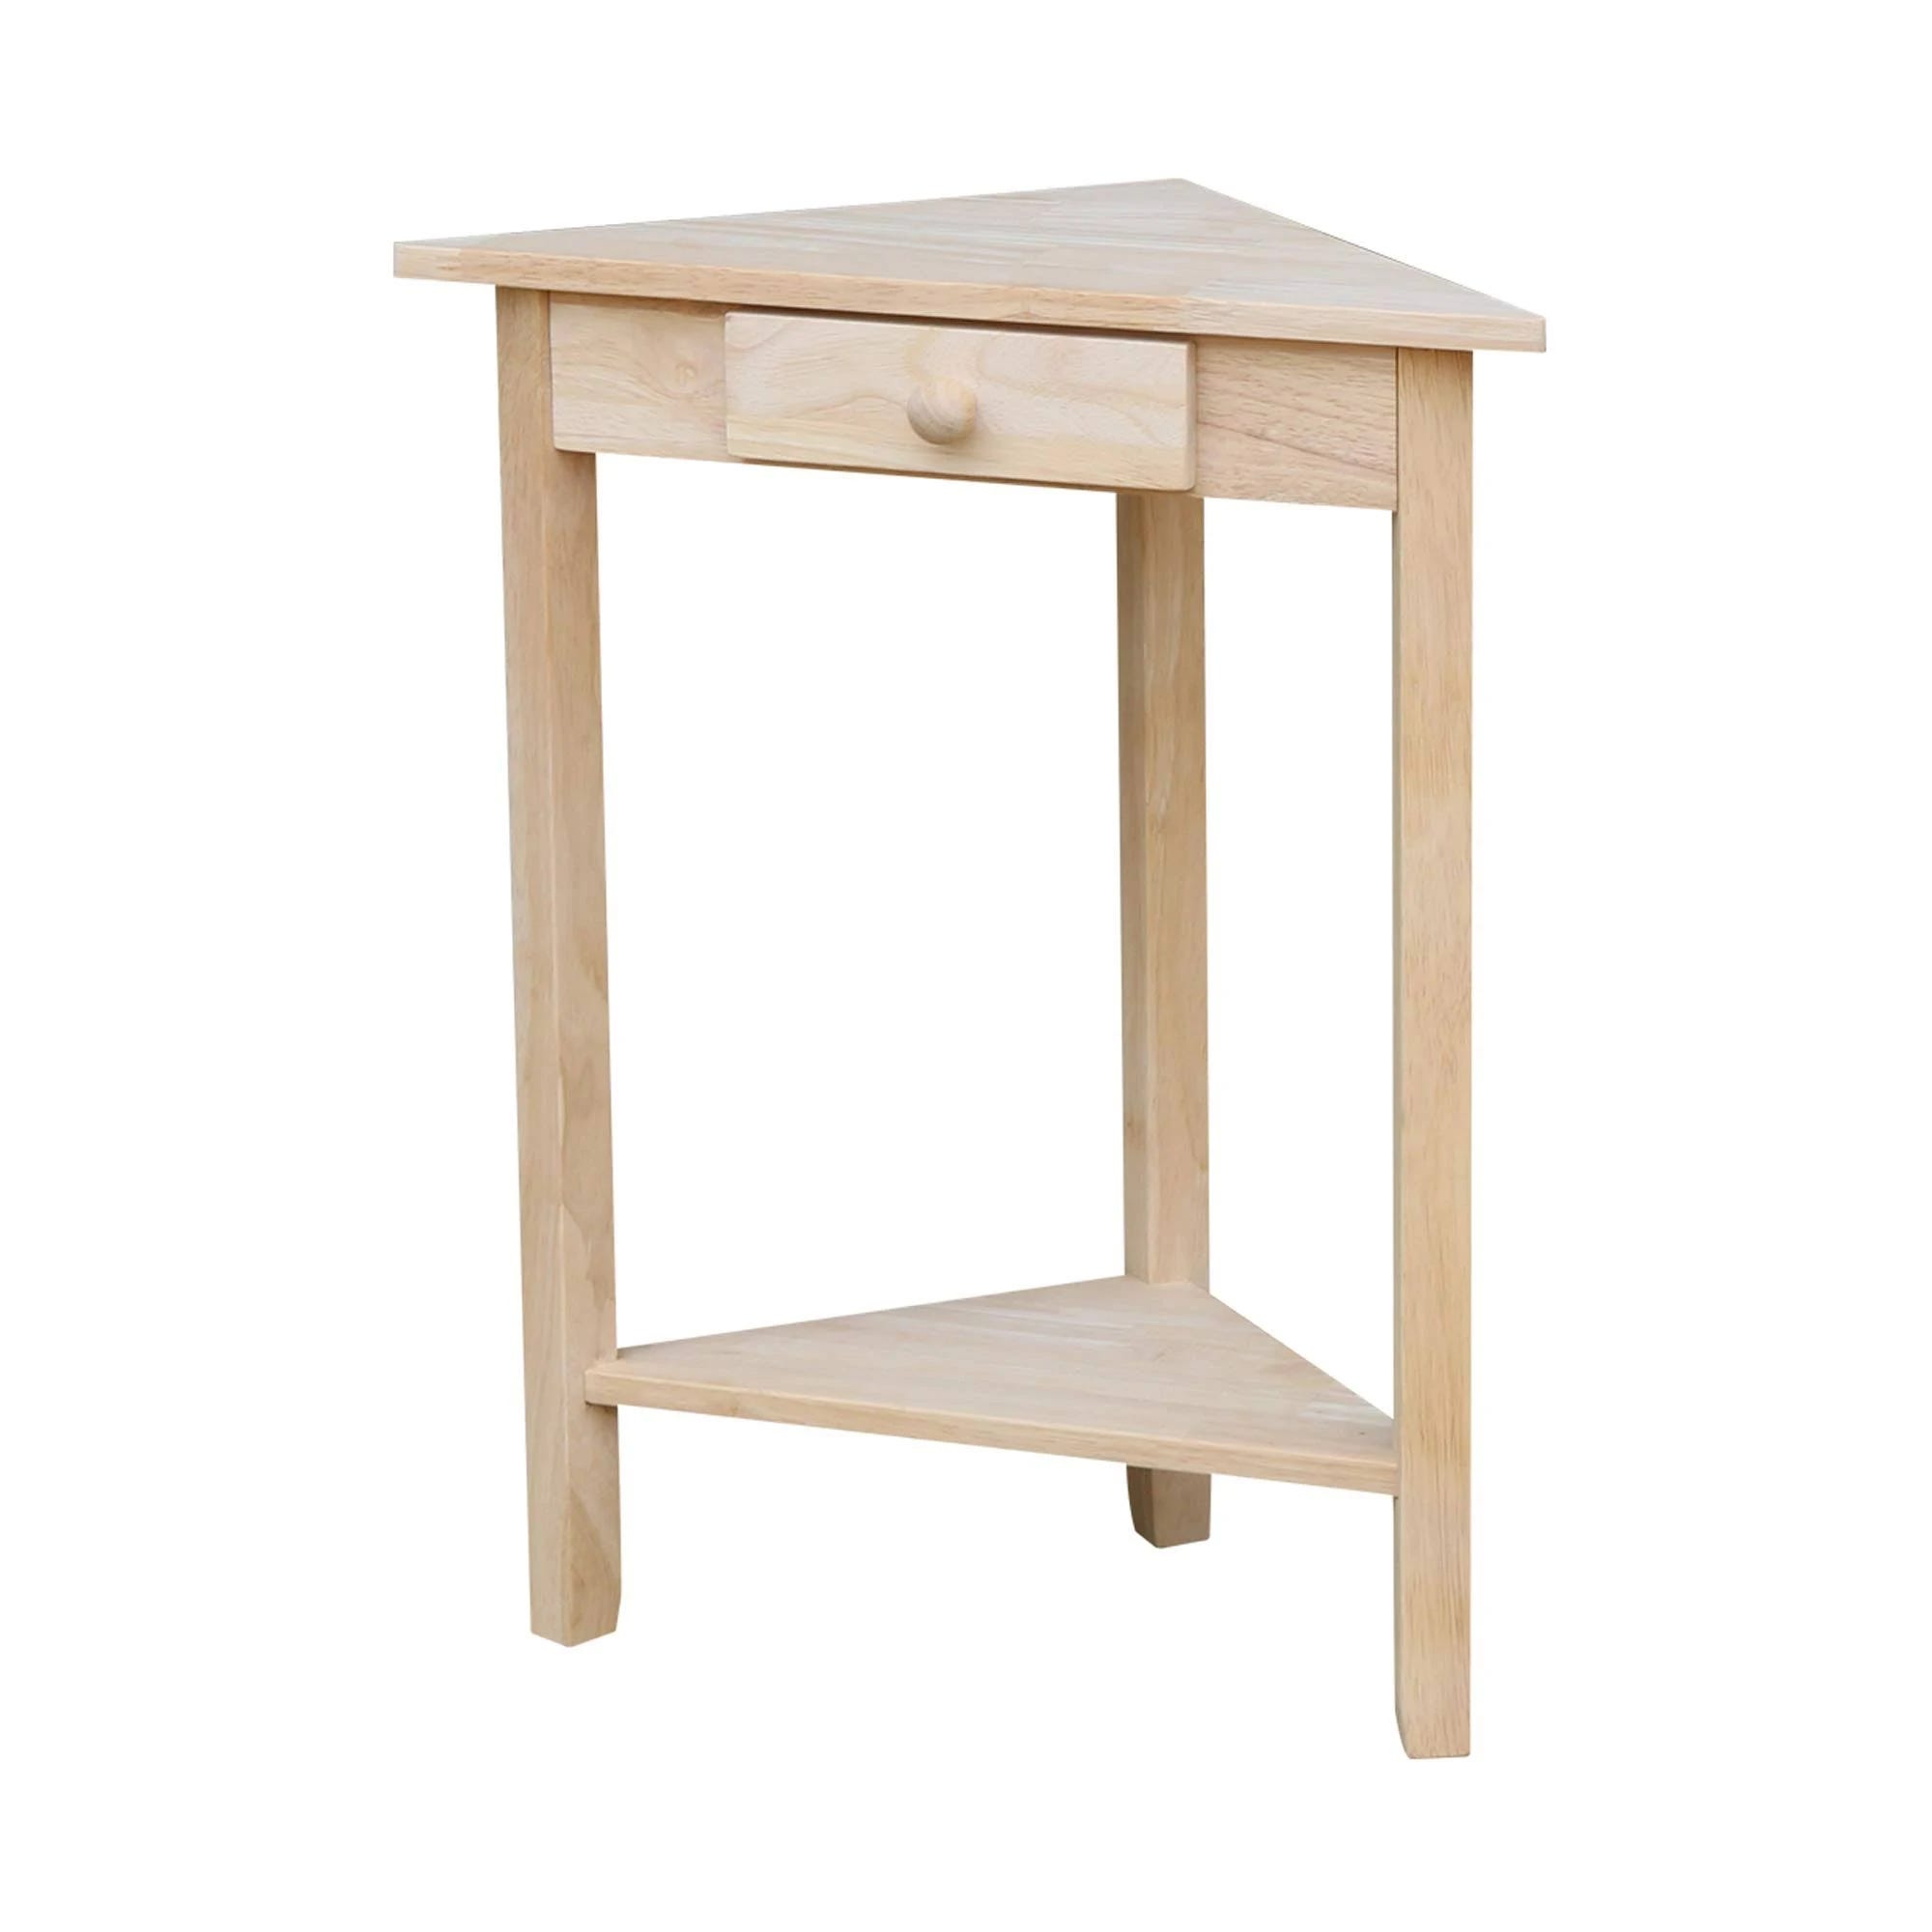 Stylish White Corner Table with One Drawer and Lower Shelf | Image